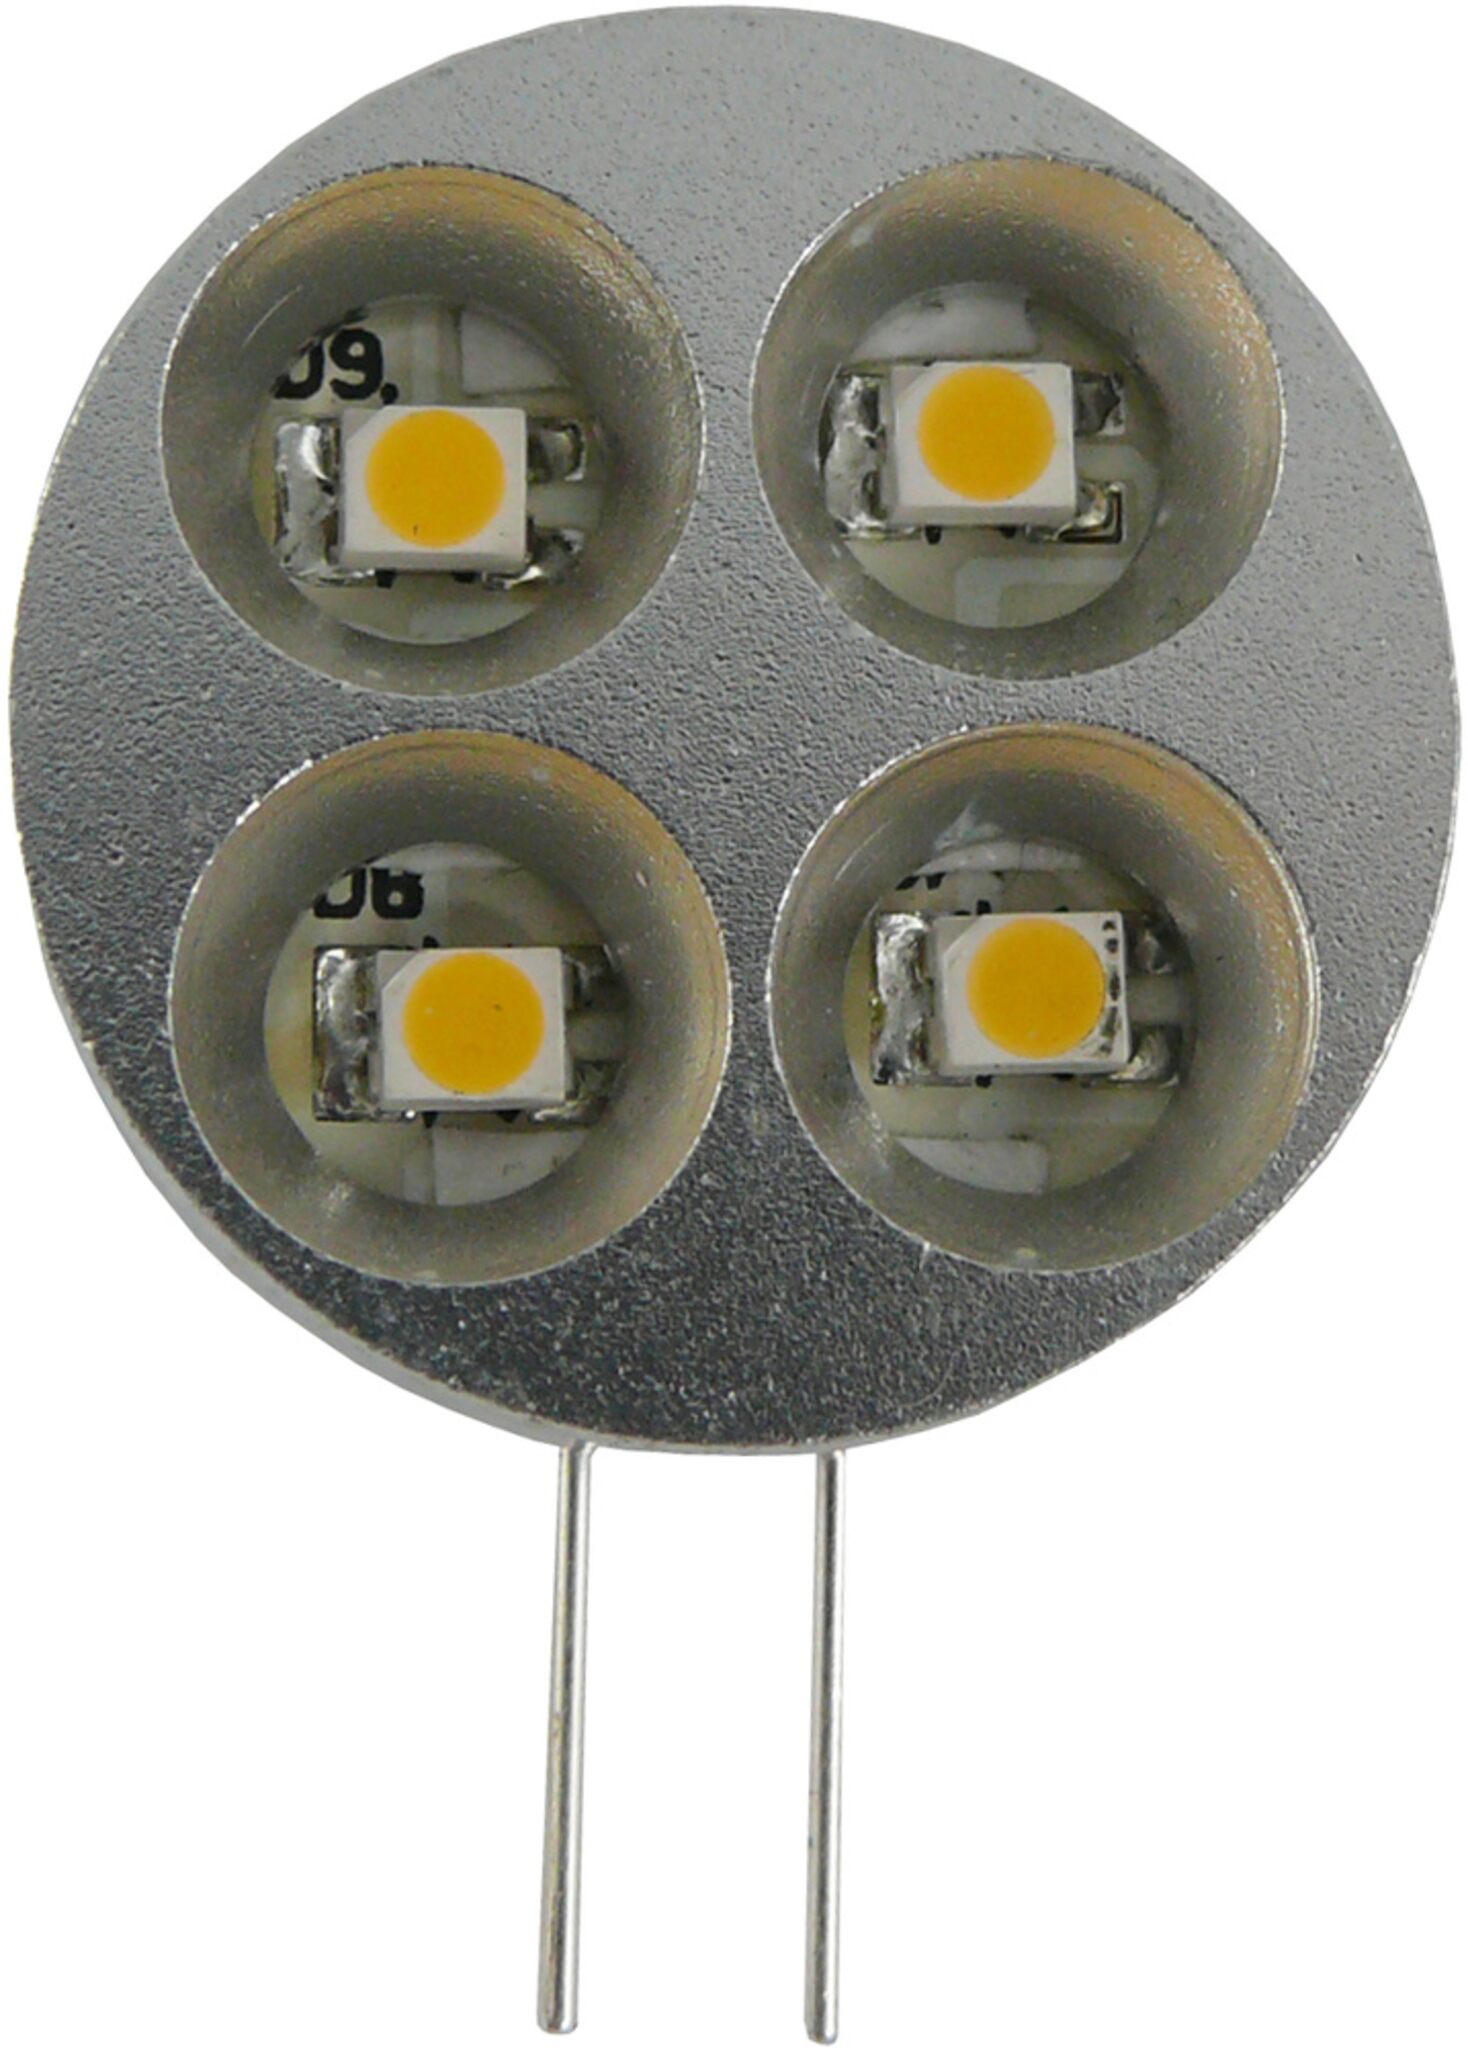 10-LED SMD module - G4 socket, 120 degrees, lateral mount